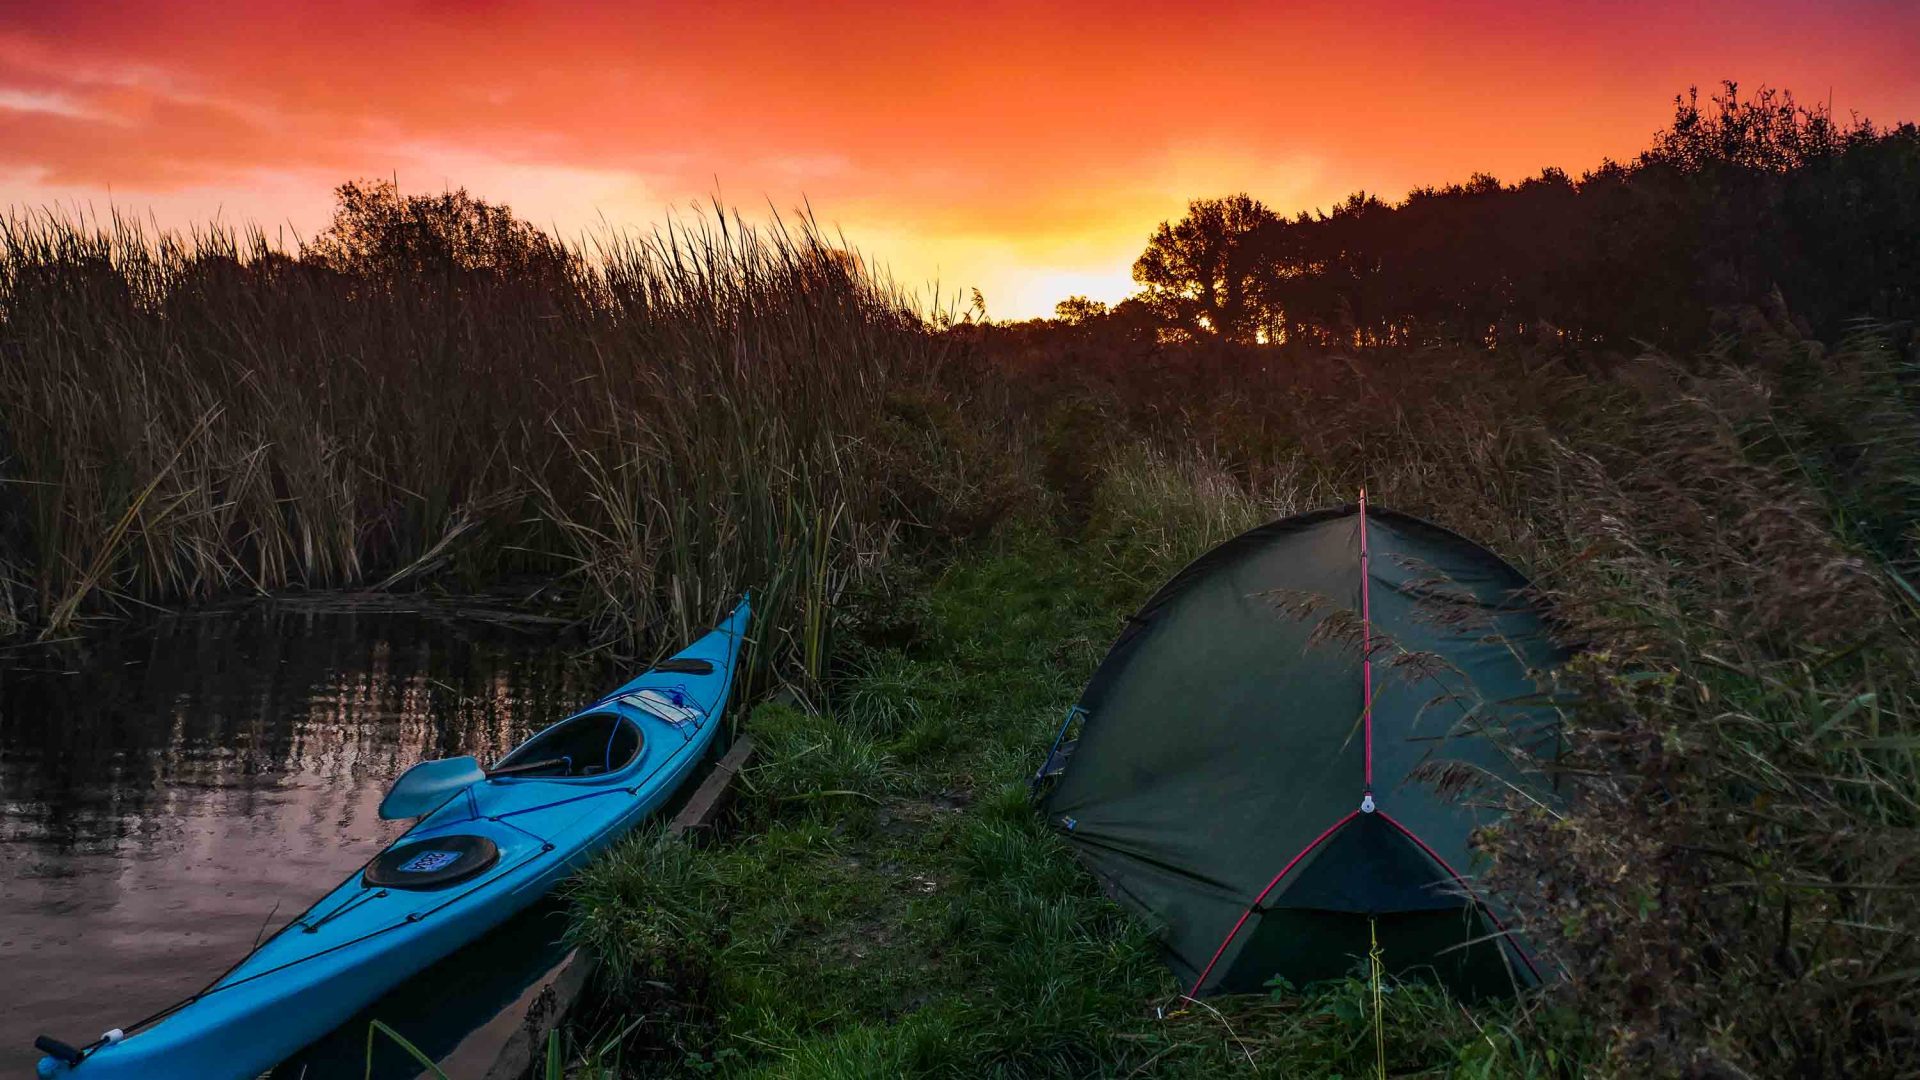 A rich orange sky, a blue kayak in the water and a green tent on the edge of the river.